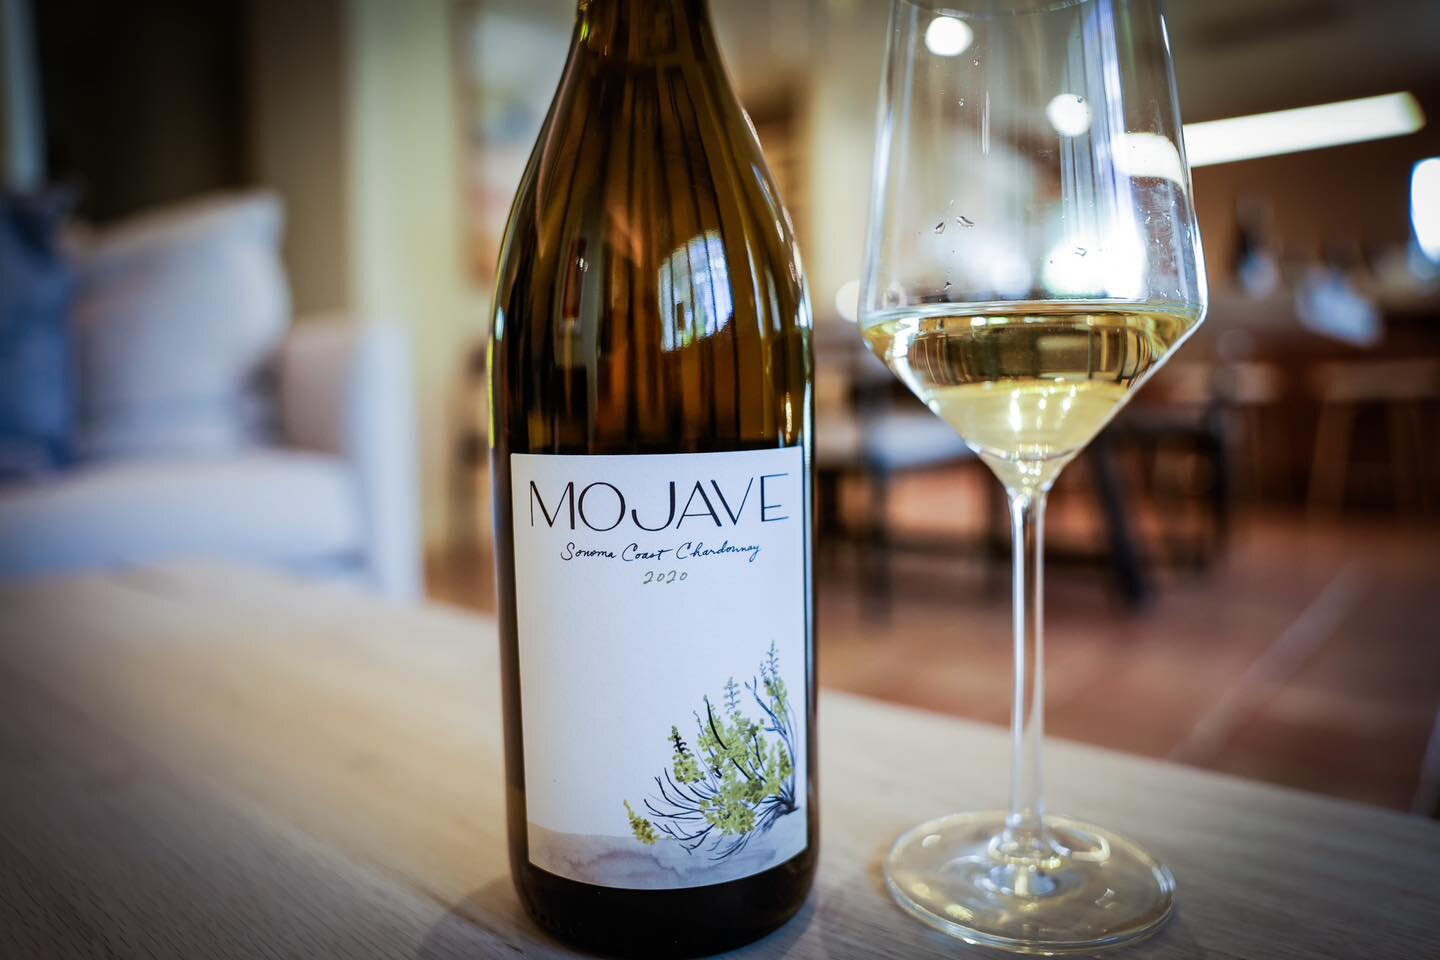 Only a few cases left of our bright citrusy Chardonnay! In these colder months we love pairing it with shellfish and the local catch. Wine geeks know that white wine is great for drinking all year long! Cheers to the winter whites! 🥂

#mojavewines #